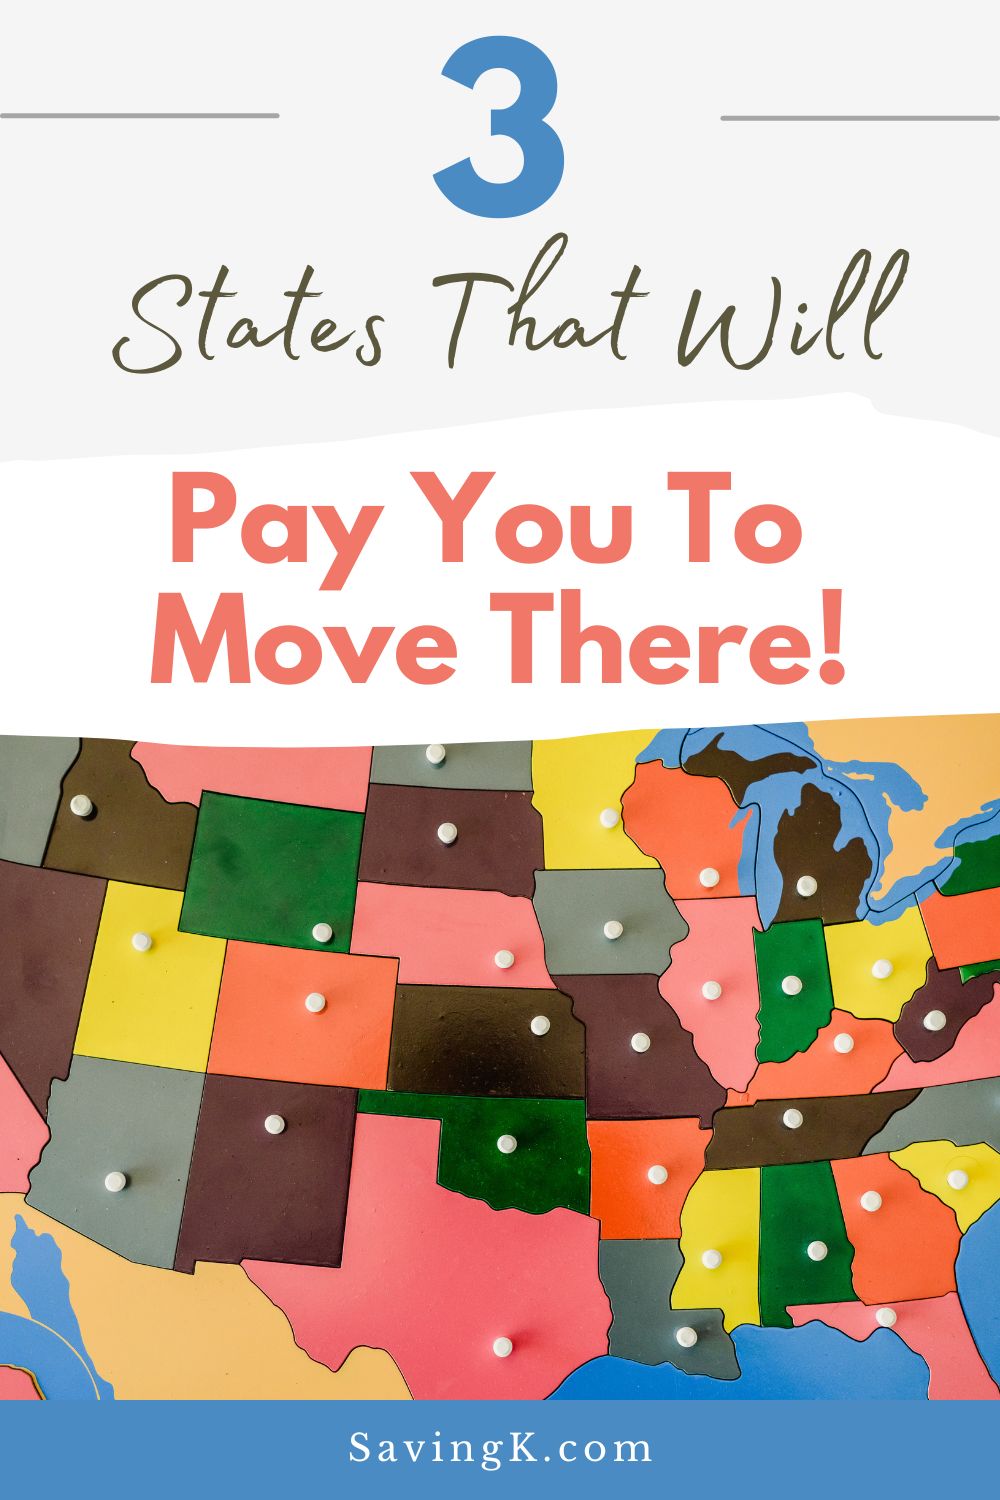 Promotional infographic highlighting states in the U.S. that will pay you to move there, offering incentives for relocation.